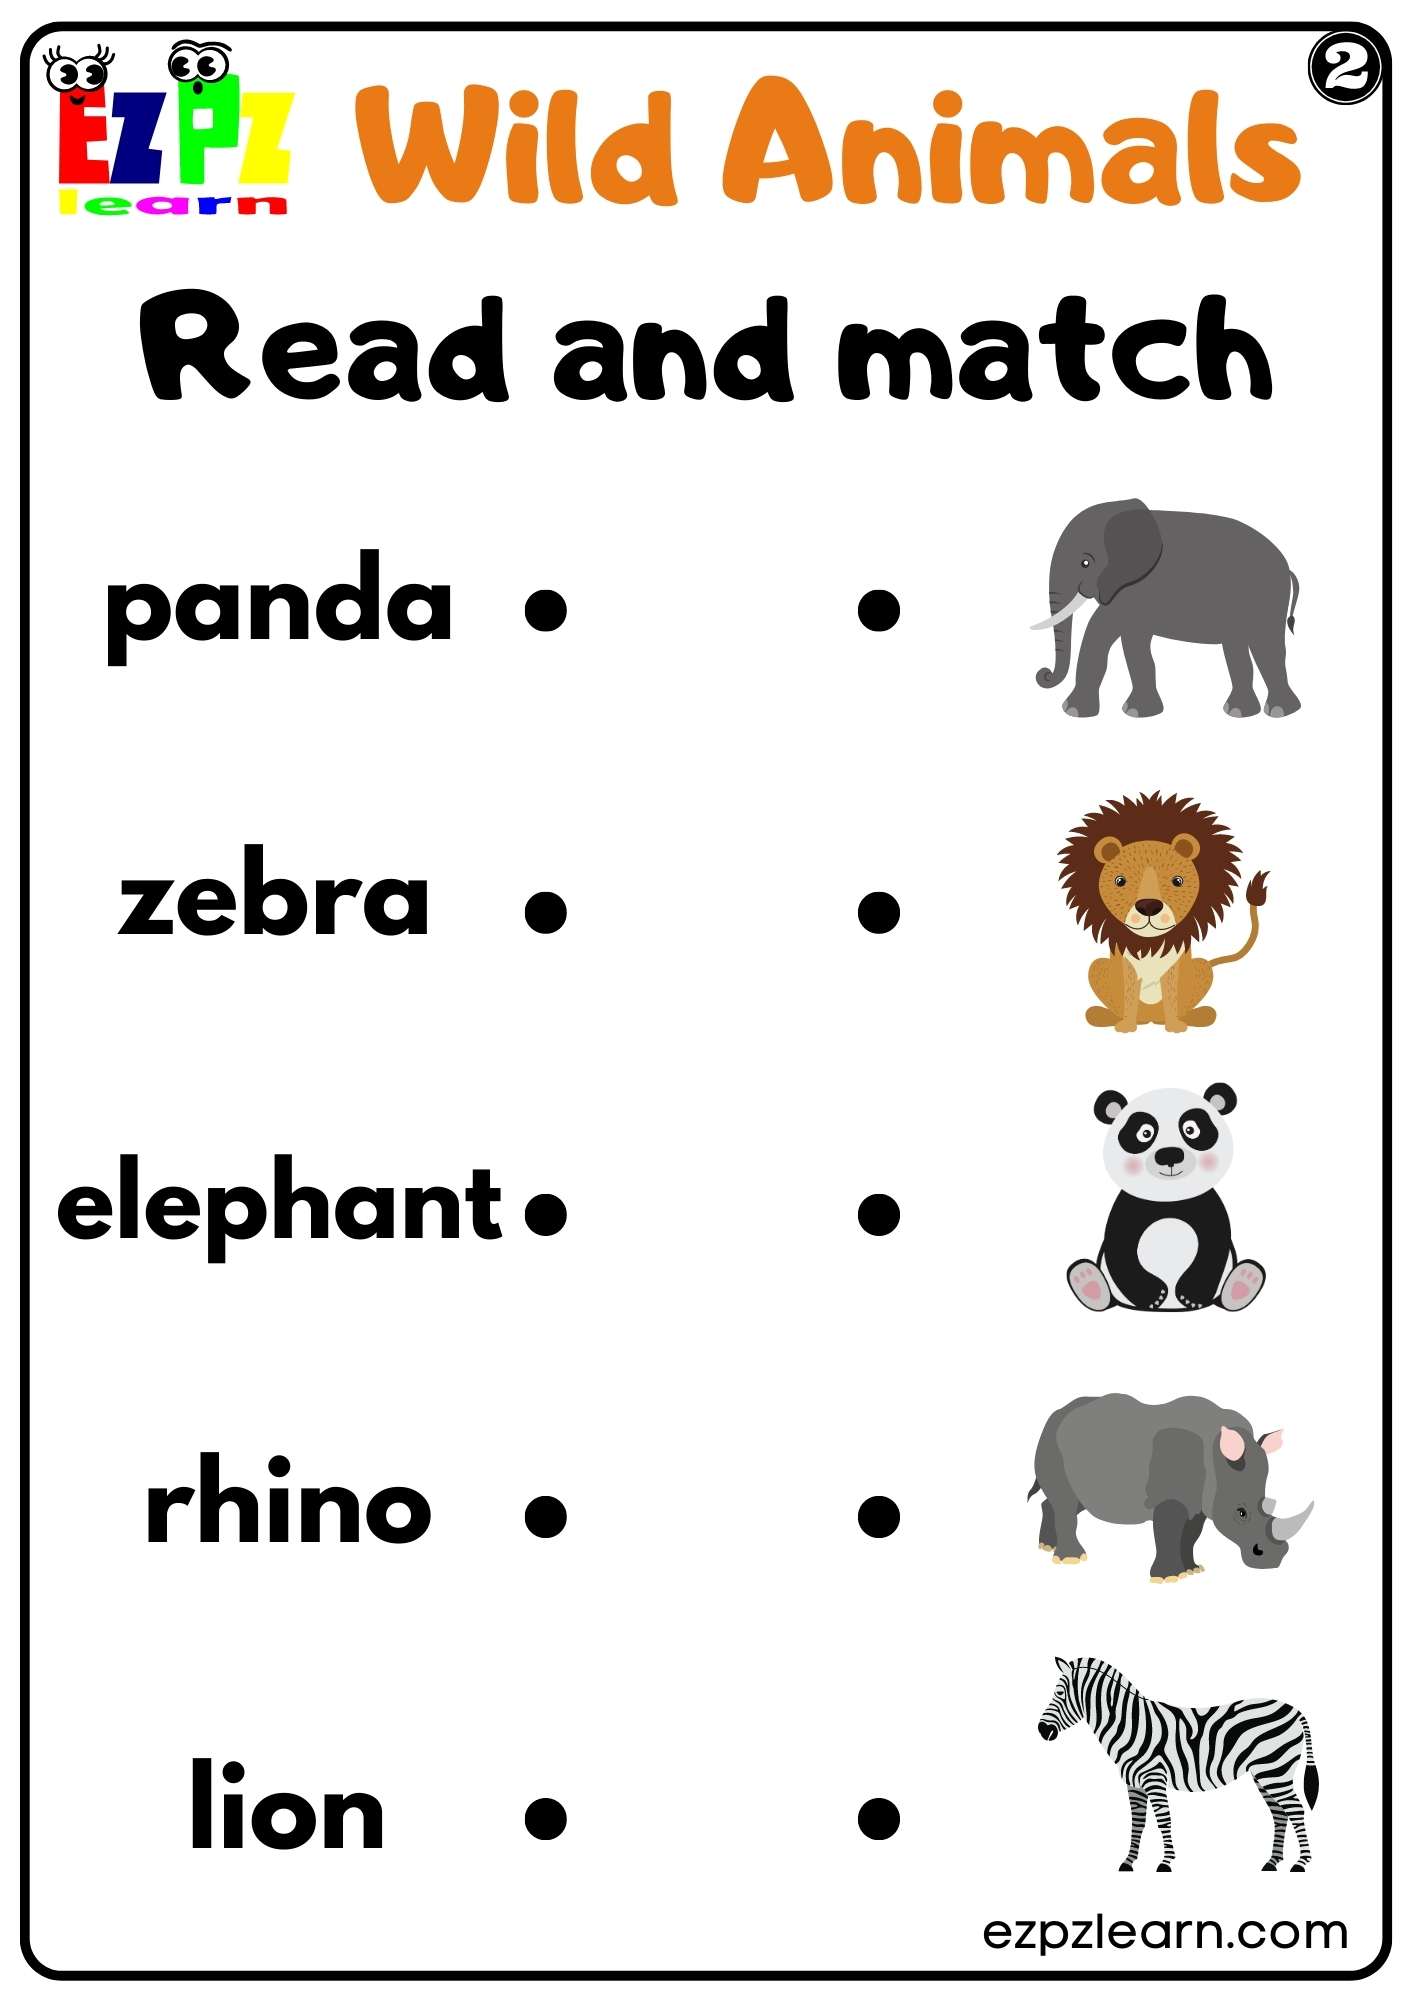 wild-animals-read-and-match-worksheet-set-2-for-kids-and-esl-pdf